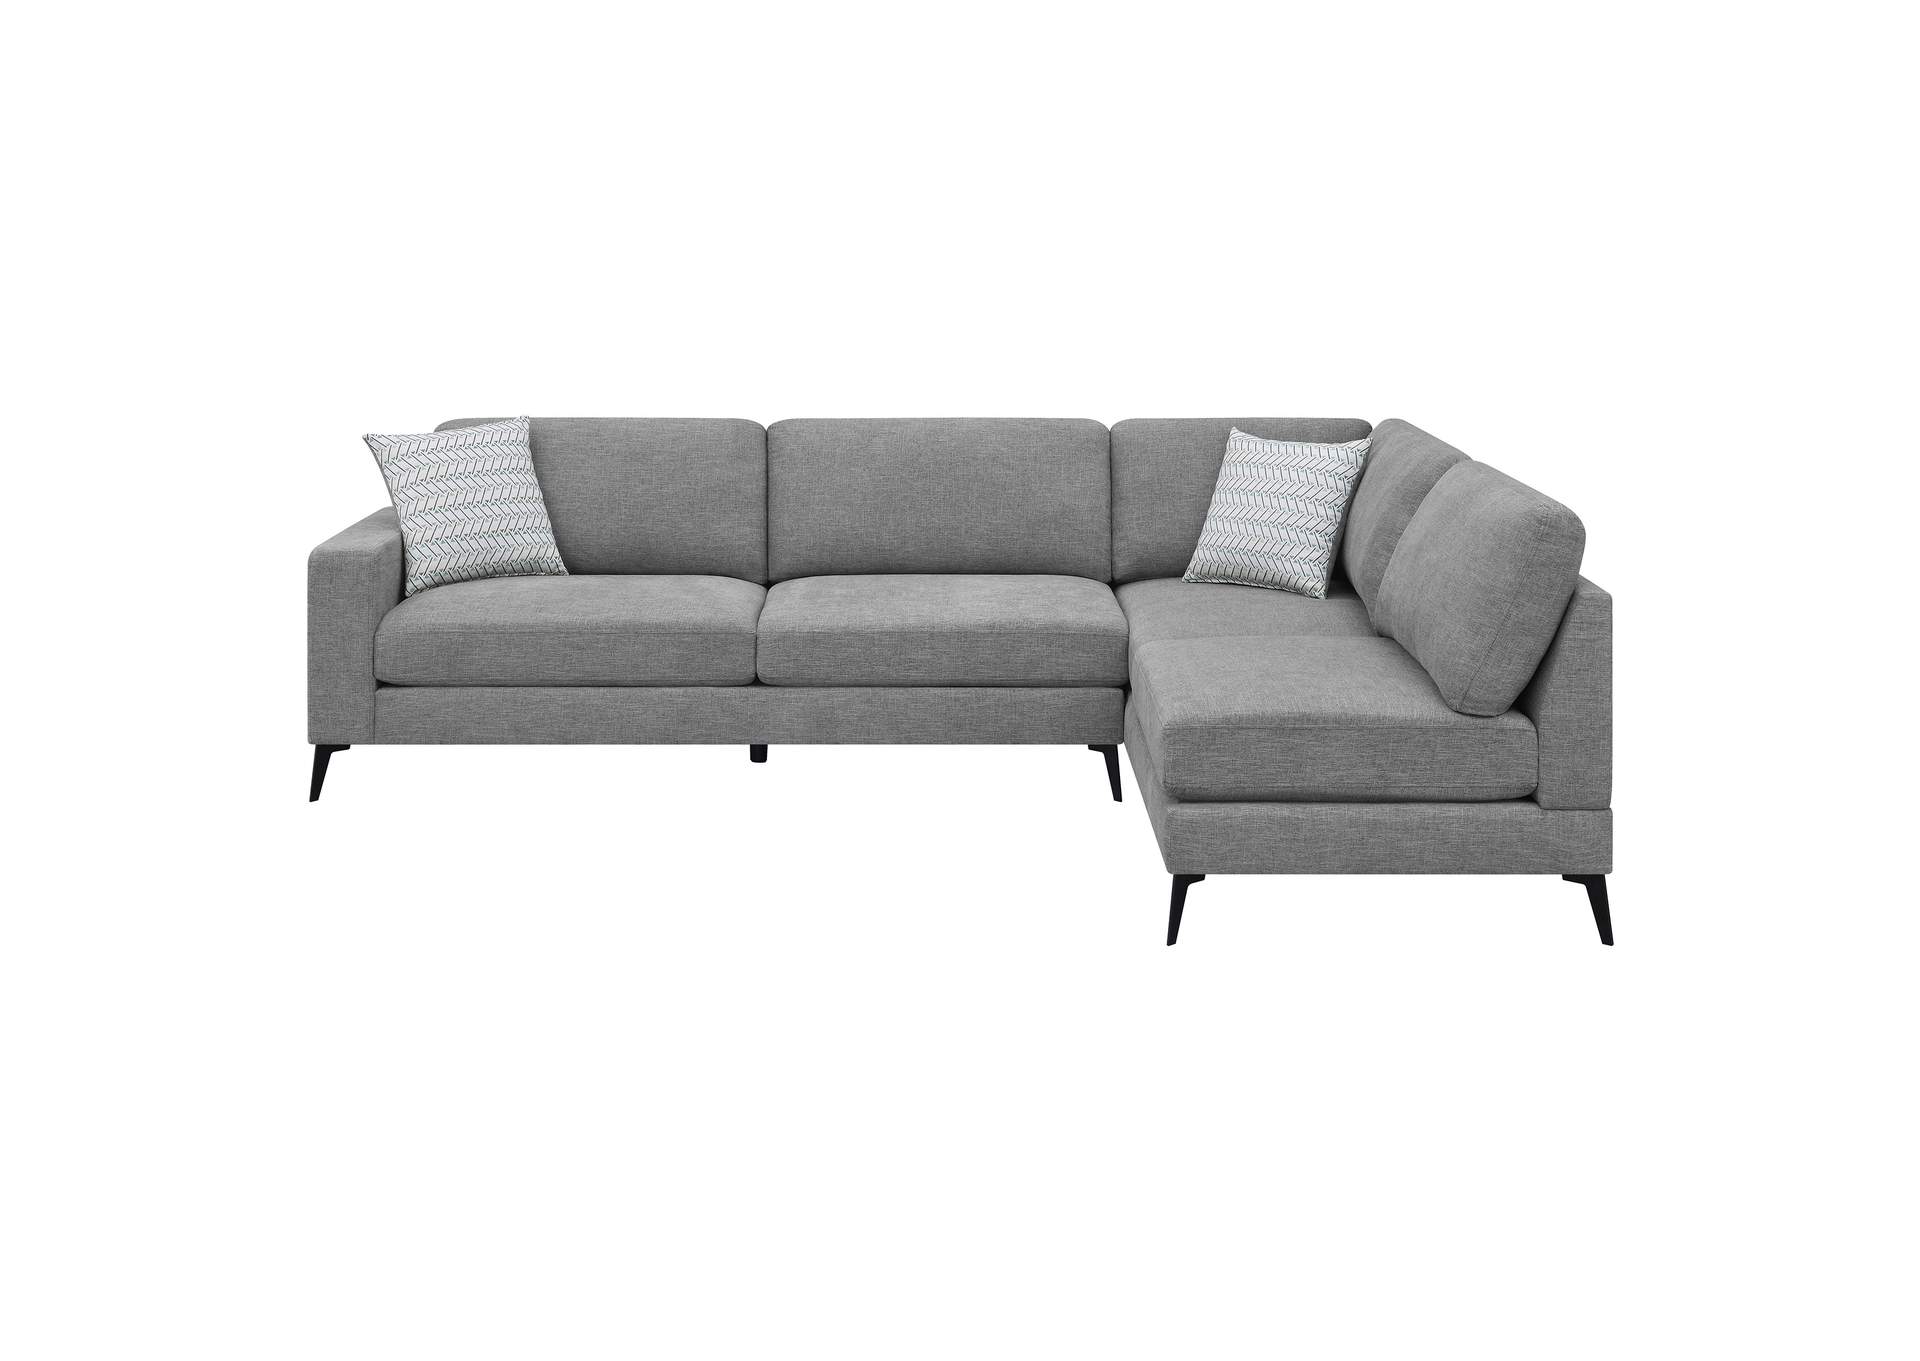 Clint Upholstered Sectional with Loose Back Grey,Coaster Furniture